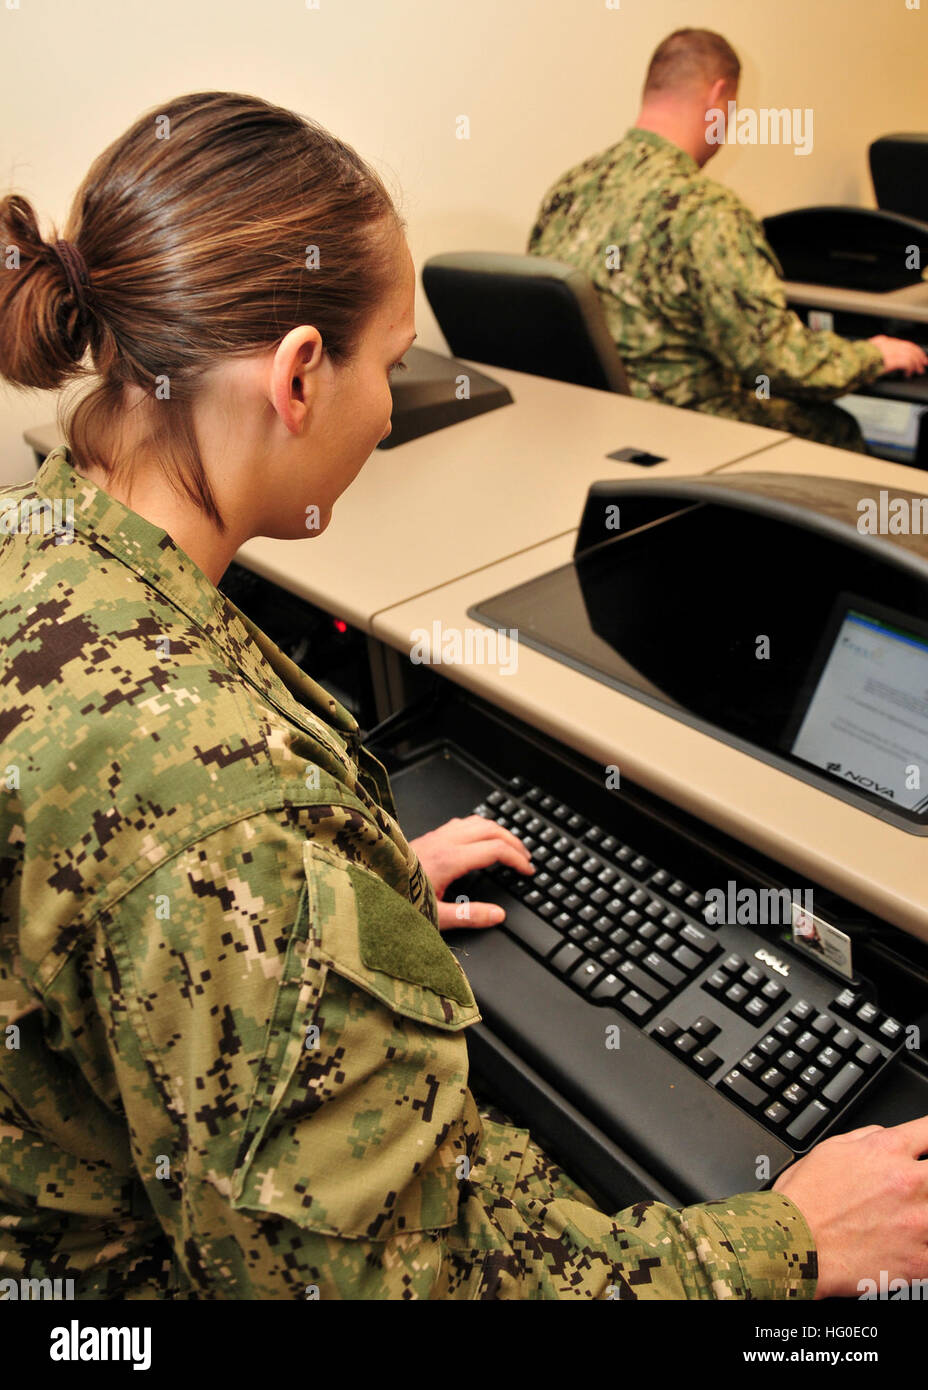 120208-N-AW868-016  GULFPORT, Miss. (Feb. 8, 2012) Seabees at Naval Construction Battalion Center Gulfport, Miss. complete a Navy computer adaptive personality scales questionnaire. The questionnaire measures 19 personality traits that are tied to the critical job/work requirements for all Navy ratings, and will someday help the Navy classify Sailors based on more individual information than the armed services vocational aptitude battery scores alone. (U.S. Navy photo by Chief Mass Communication Specialist Ryan G. Wilber/Released) US Navy 120208-N-AW868-016 Seabees at Naval Construction Battal Stock Photo